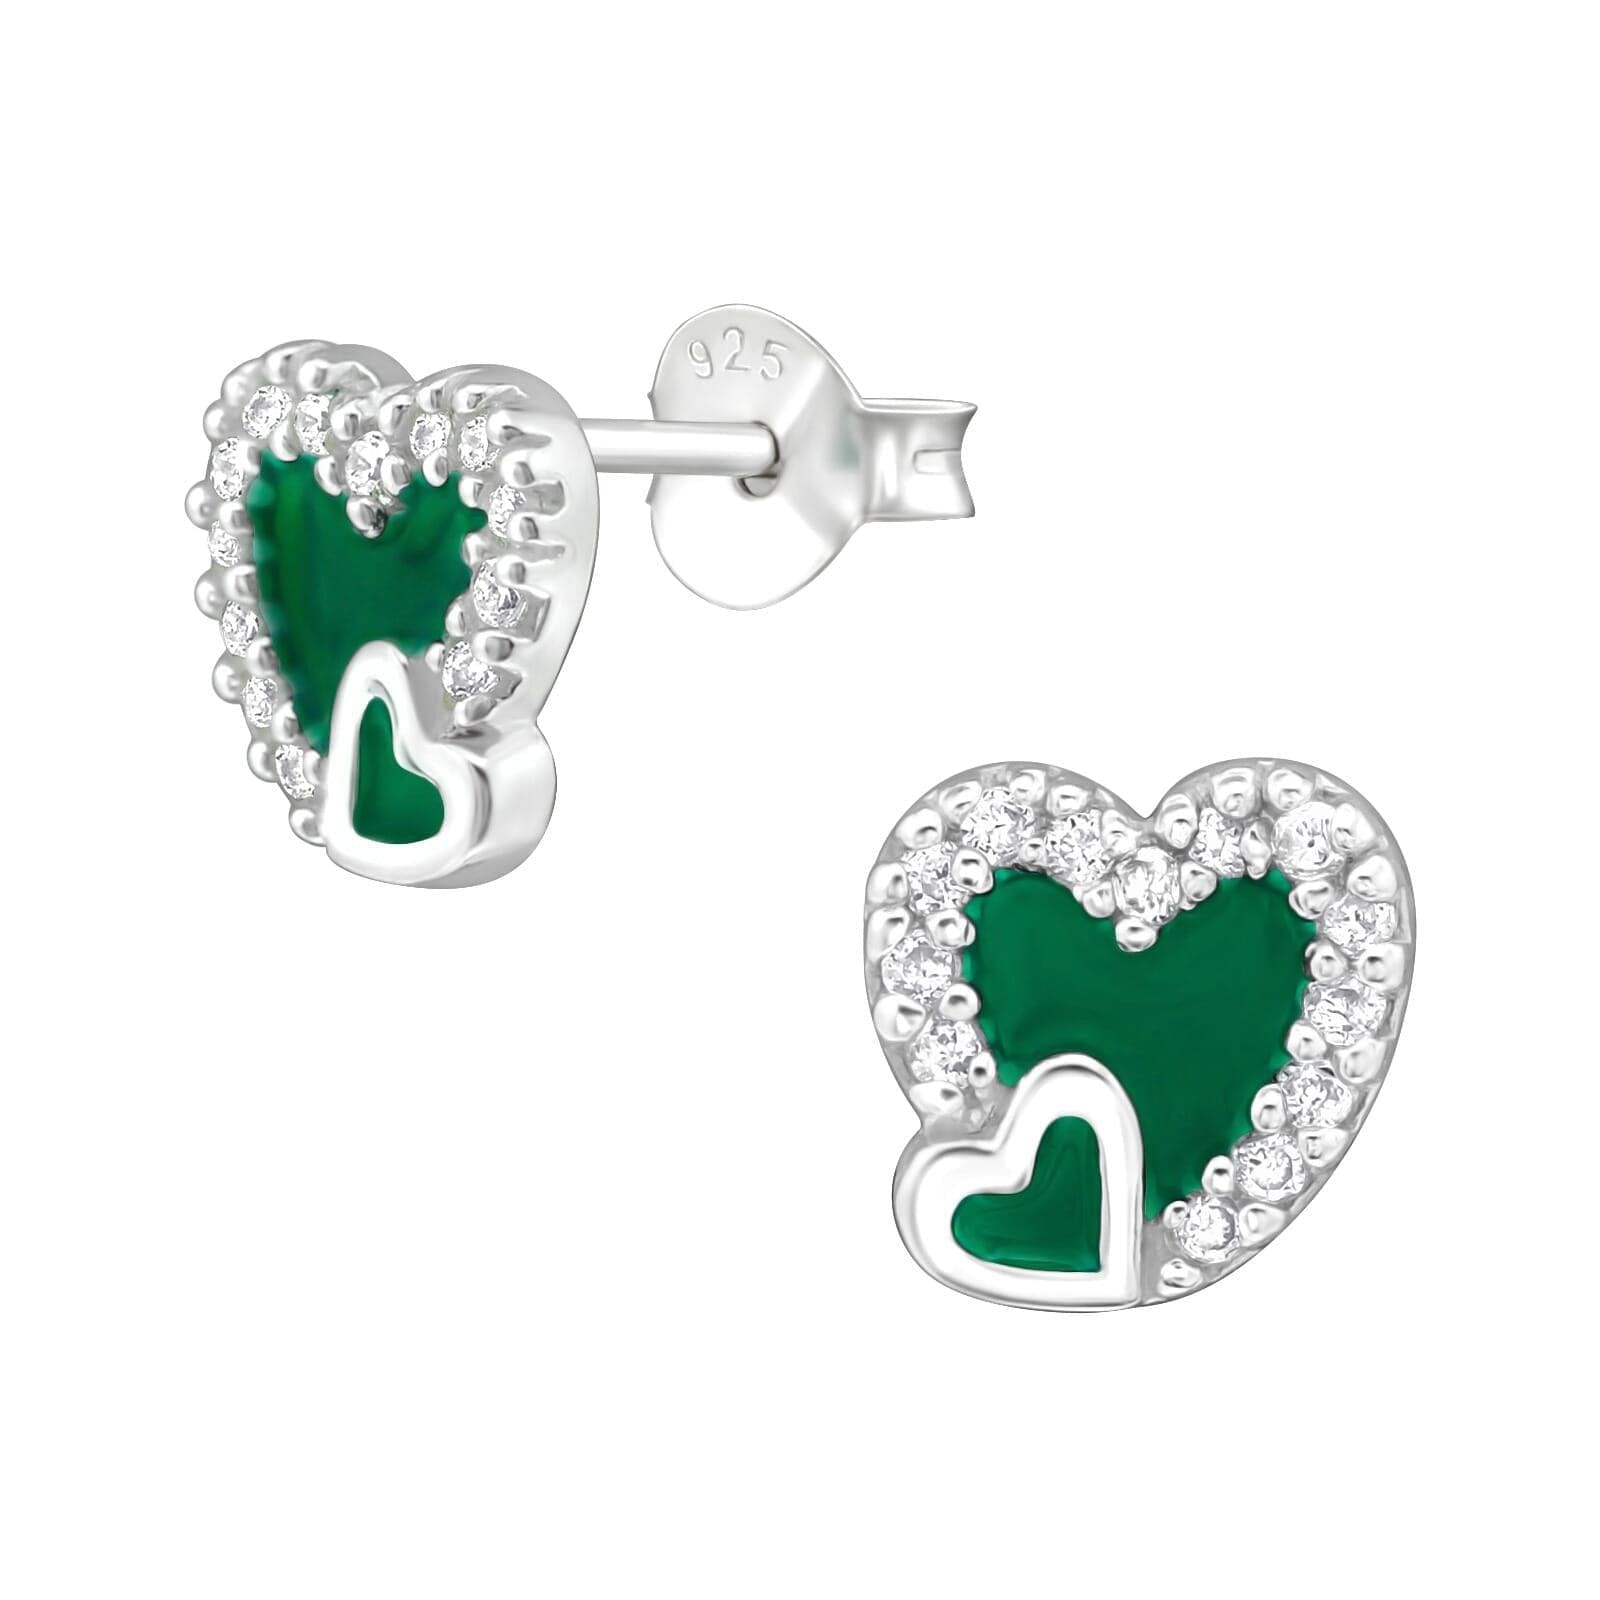 Asfour 925 Sterling Silver Earring with Round Zicron Stone, Green